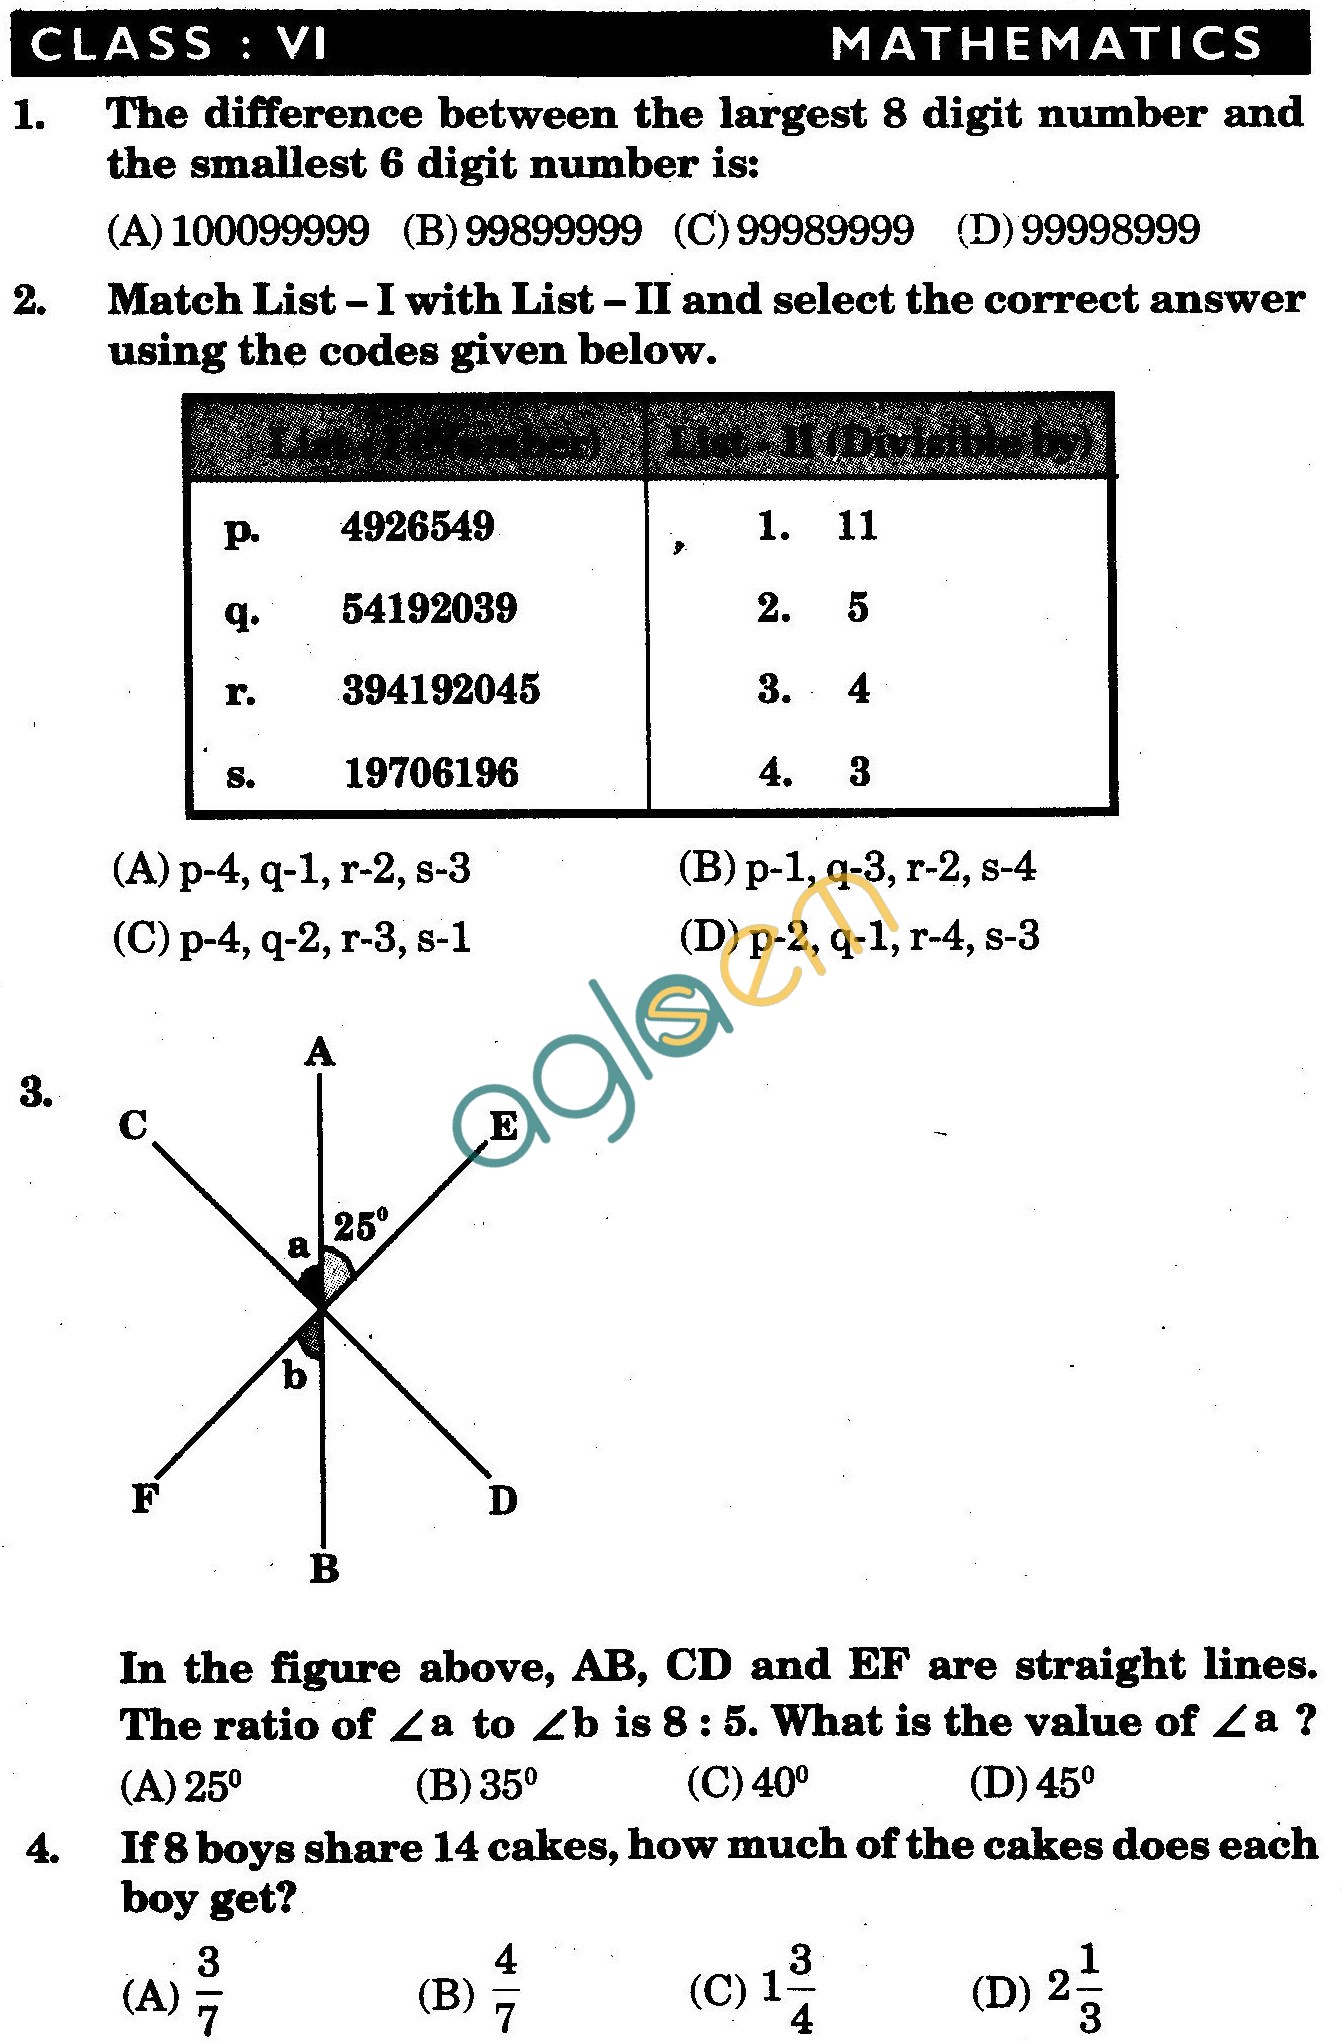 NSTSE 2010: Class VI Question Paper with Answers - Mathematics